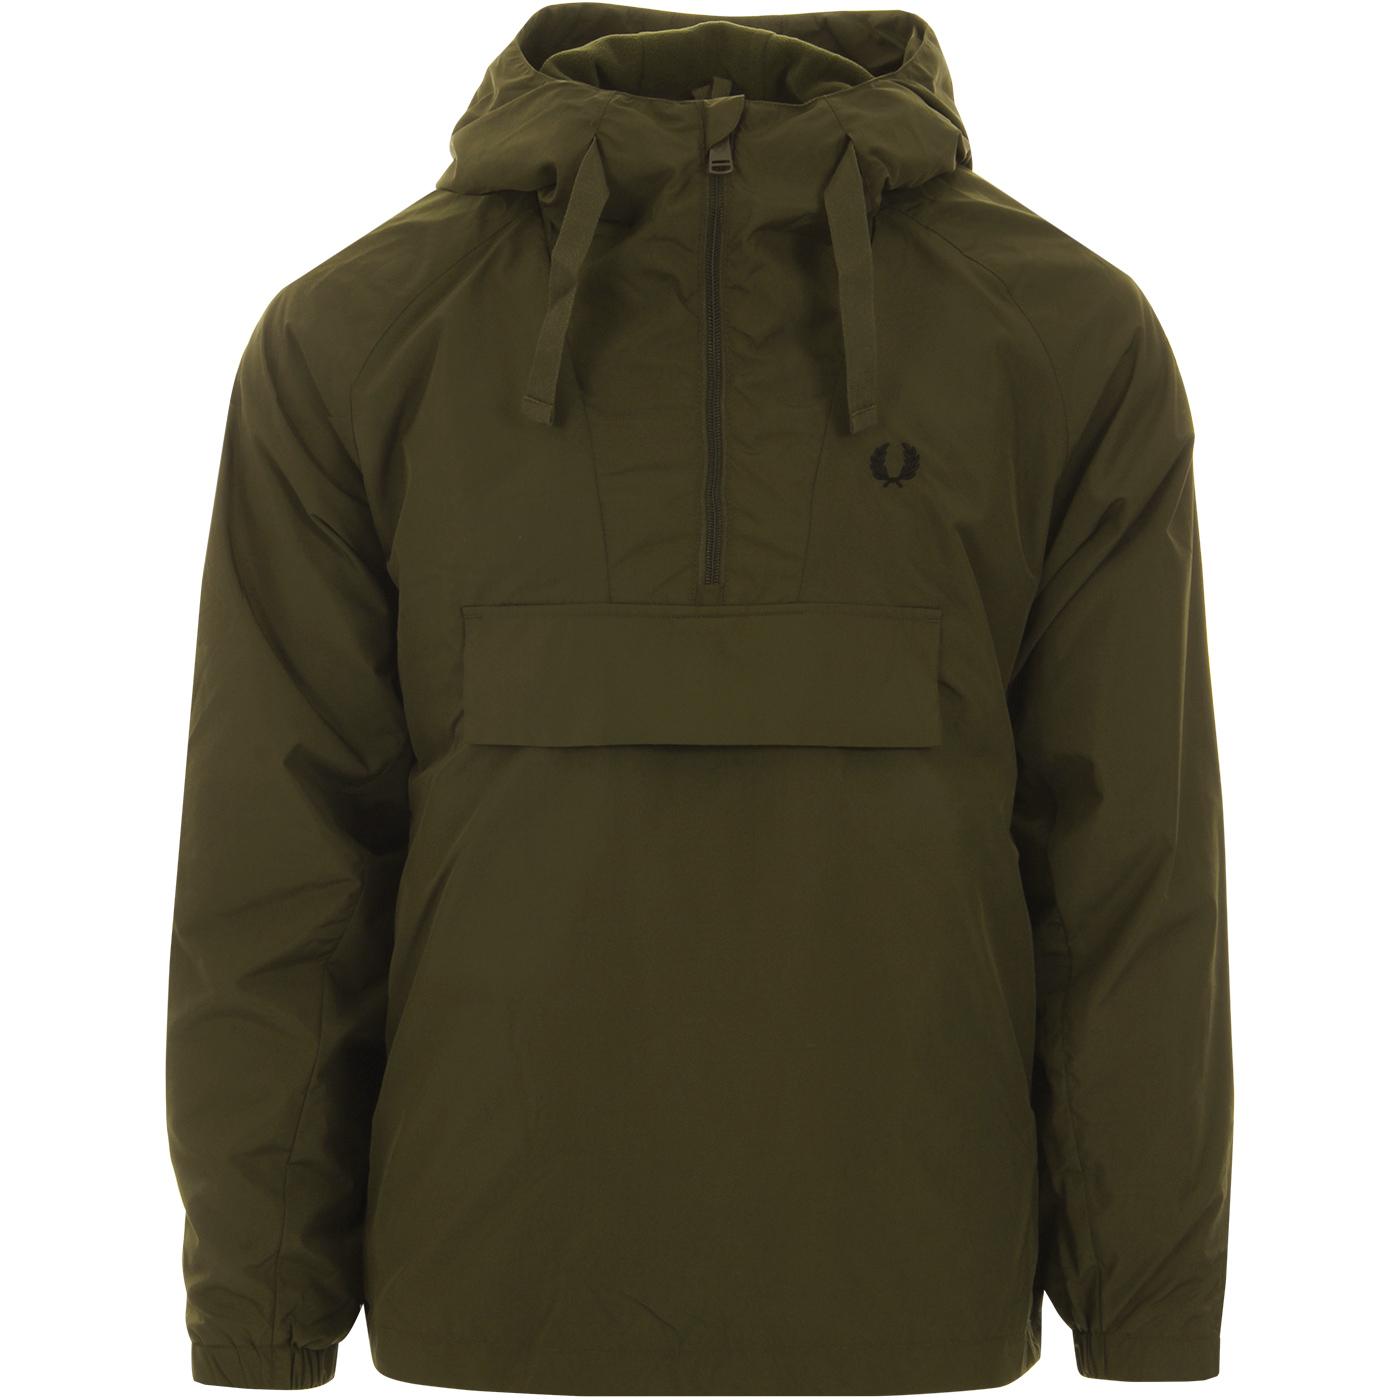 FRED PERRY Men's Mod Overhead Ripstop Jacket DT